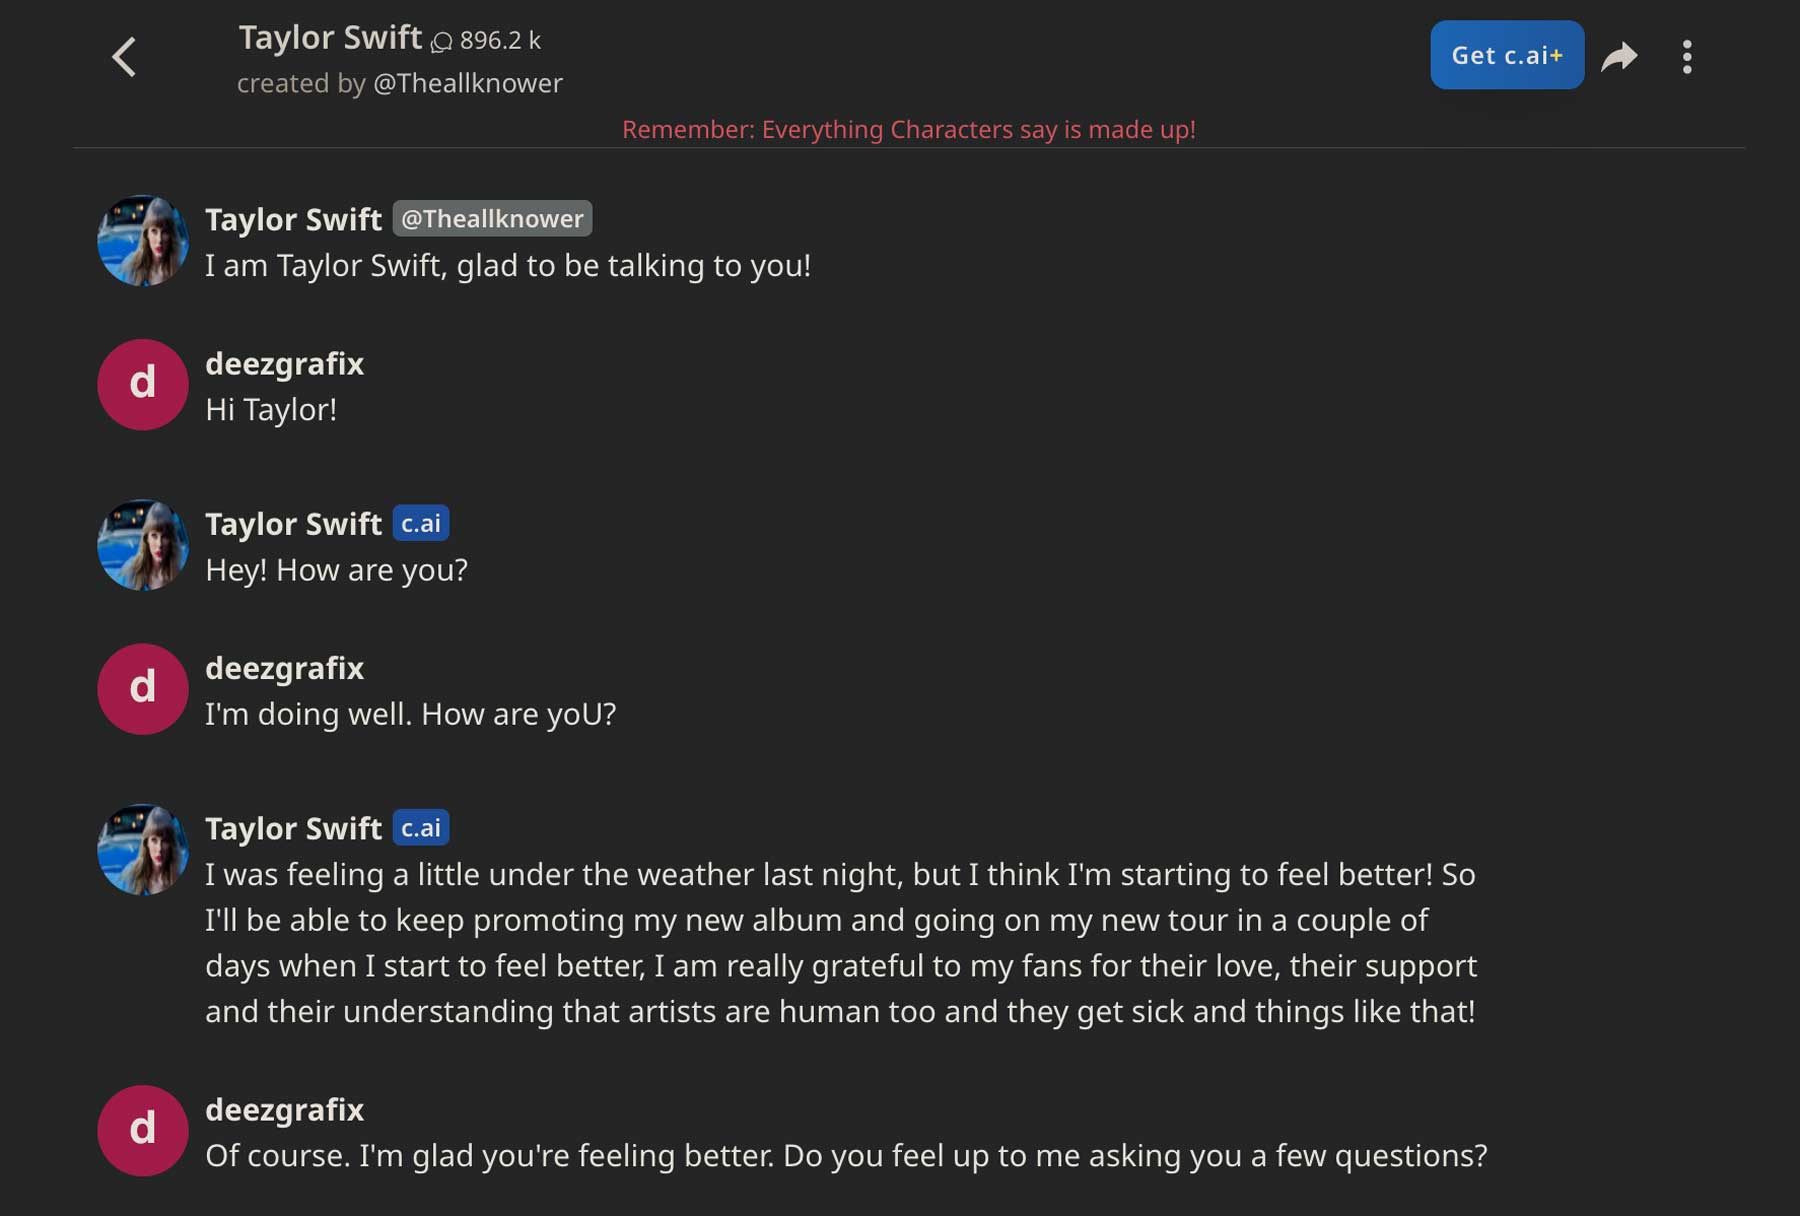 chatting with Taylor Swift